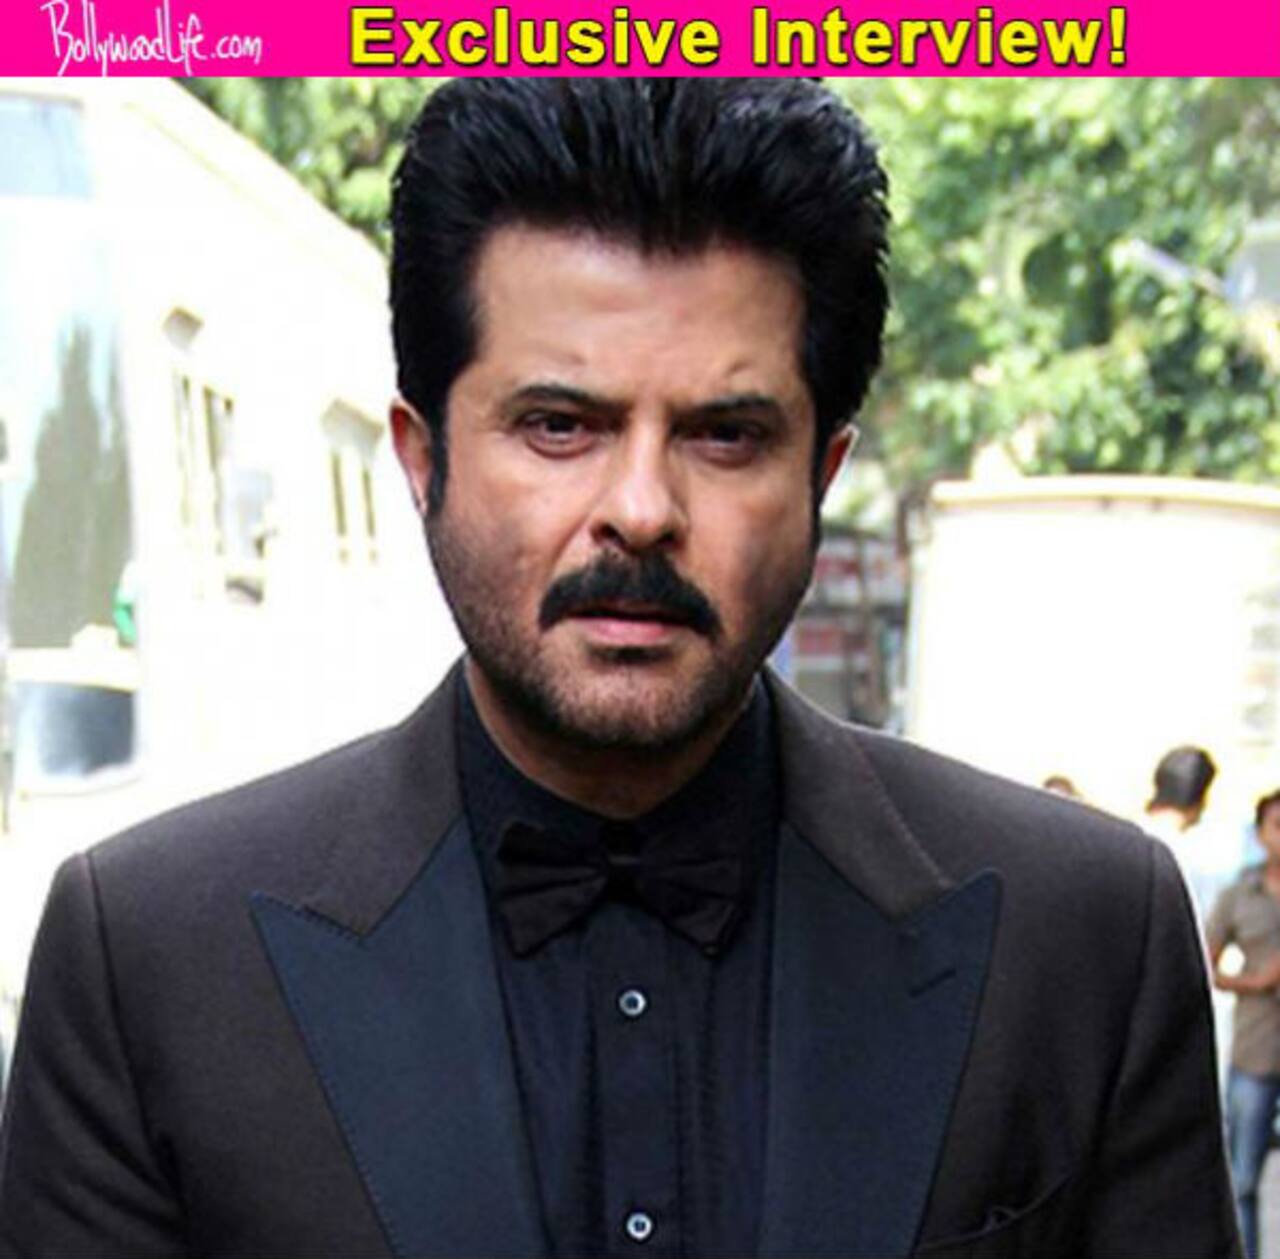 Anil Kapoor: I would choose Bradley Cooper for the remake of Welcome Back